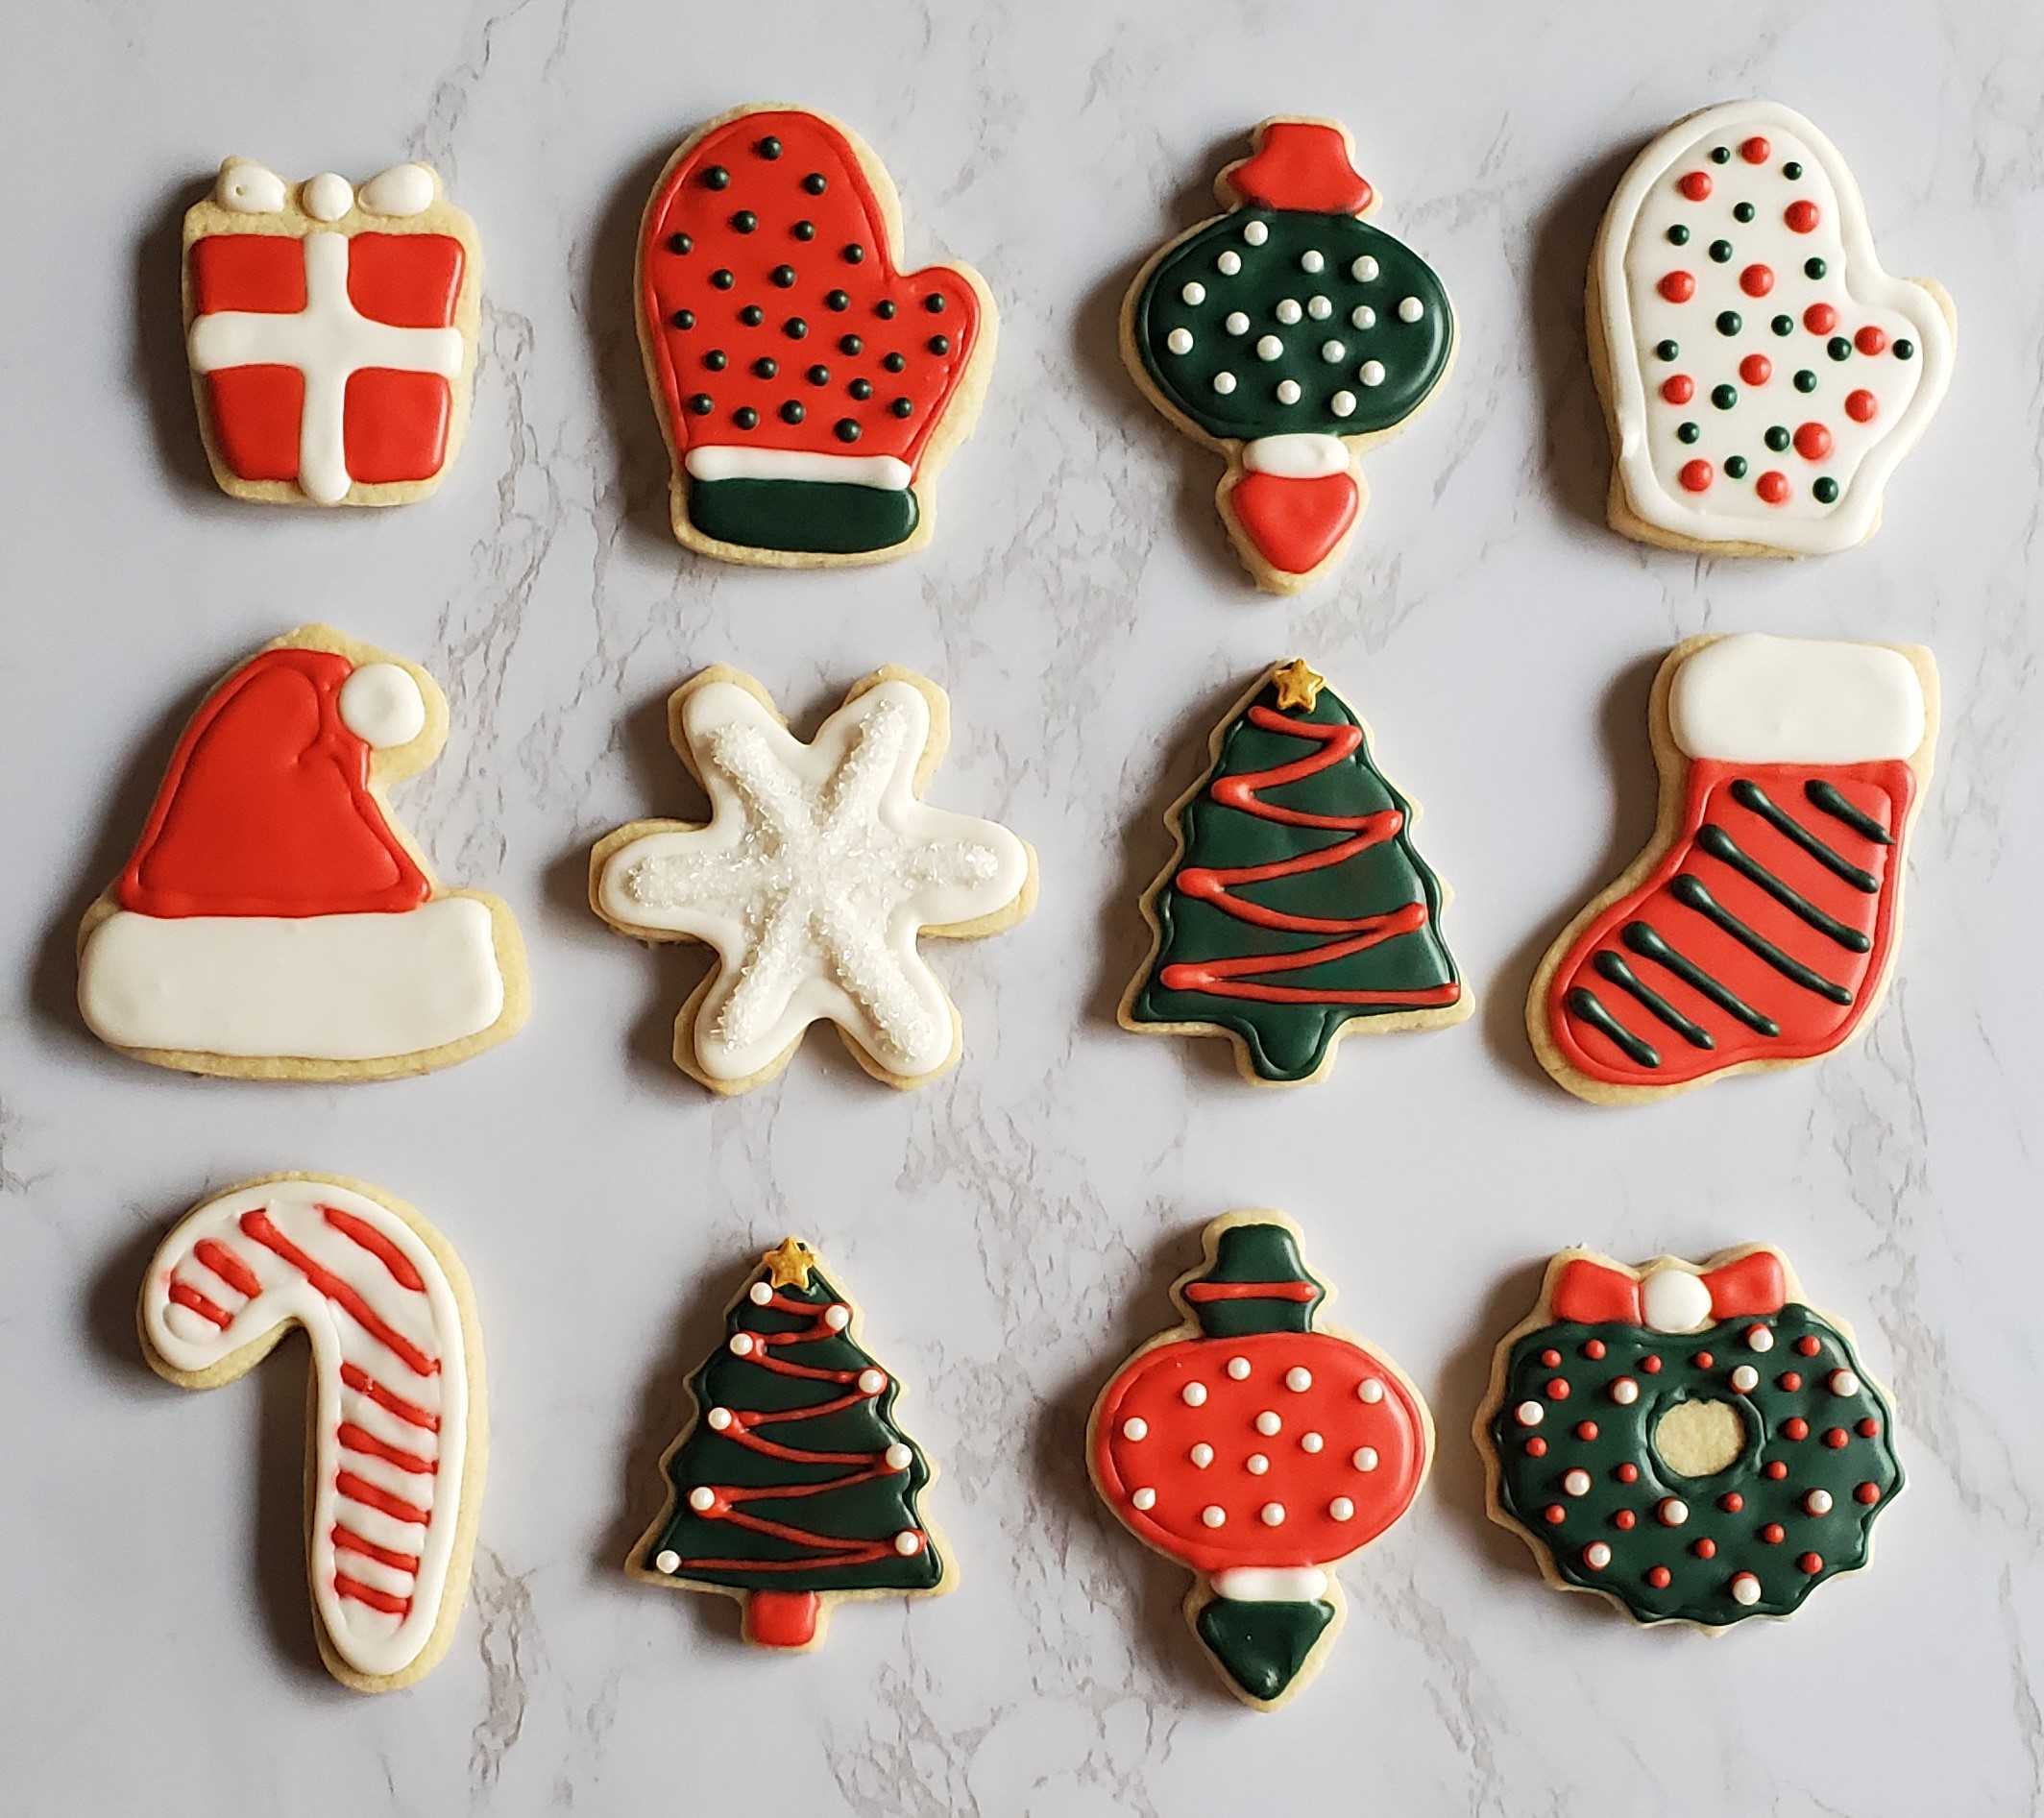 Christmas cookies in the shapes and decorated as gifts, mittens, ornaments, snowflakes, candy canes, christmas trees, wreaths and stockings. Decorated with royal icing in red white and green and sprinkles!